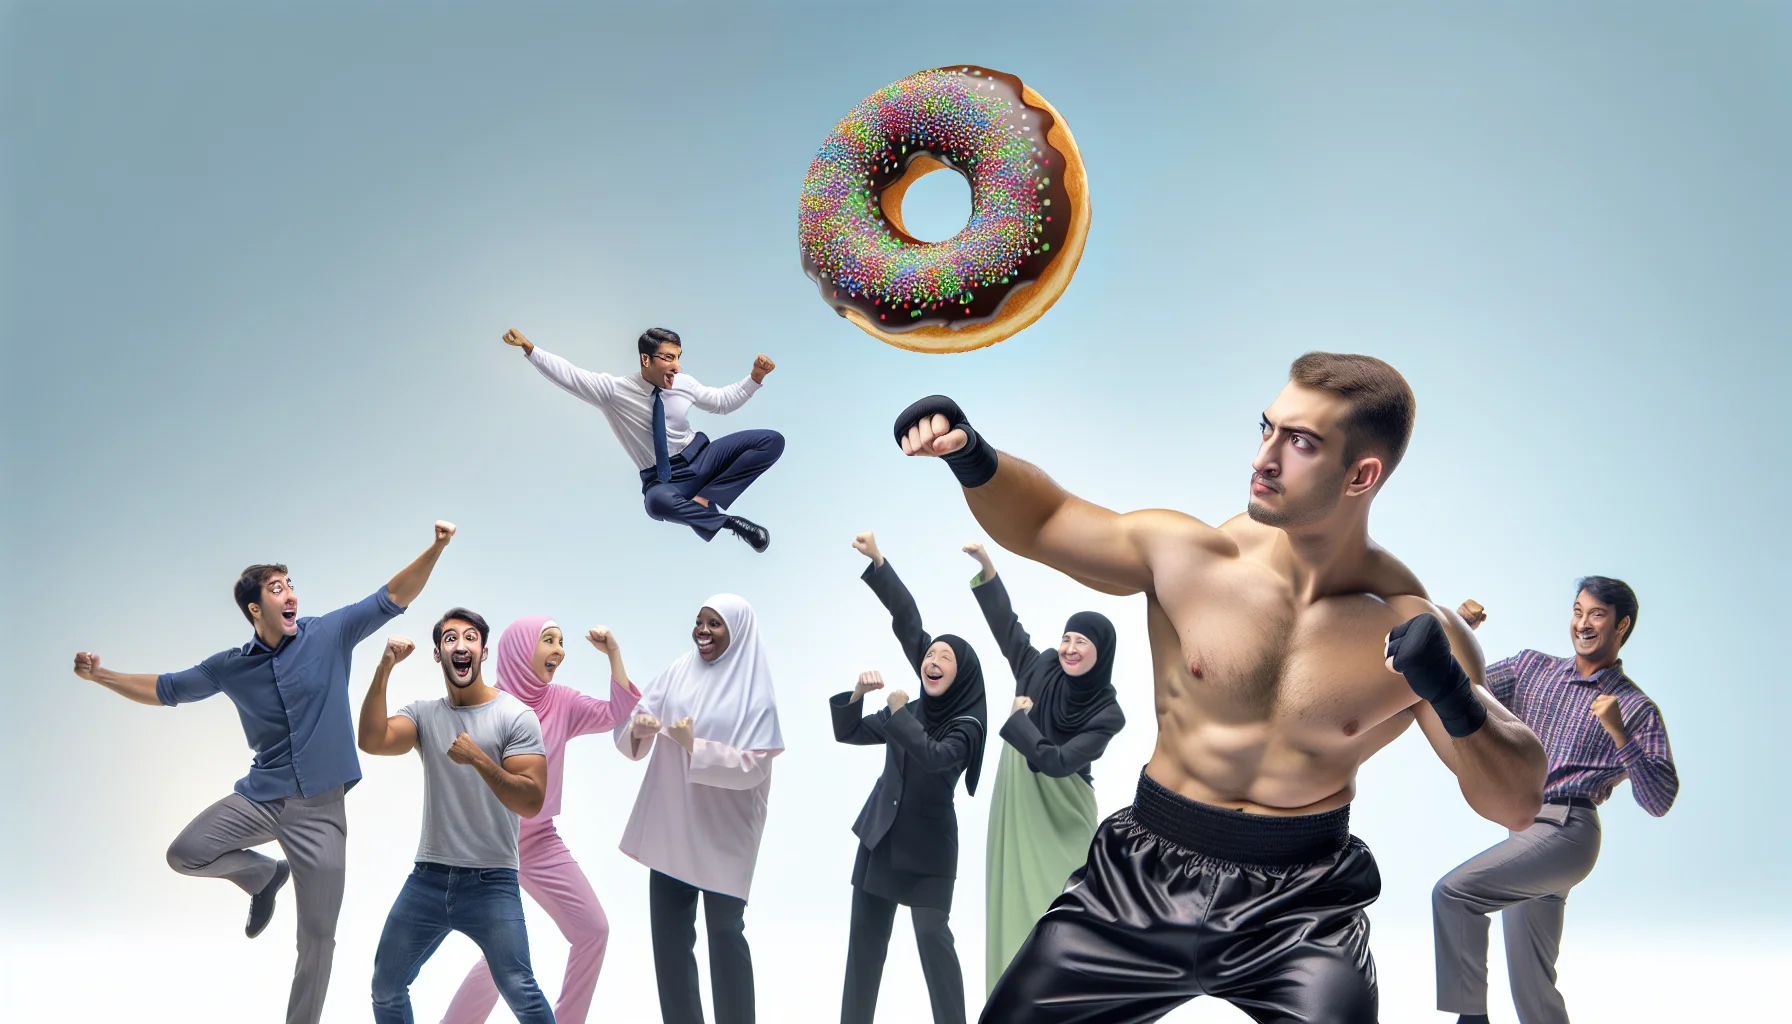 Create a realistic image showcasing a muscular individual known for their proficiency in kickboxing in a humorous scenario where they are encouraging people to exercise. This male individual has short hair and is striking a kickboxing pose, pretending to punch a flying donut, making it a comedic juxtaposition. People around are laughing and joining in, showing diverse ethnic backgrounds and genders. Each person is attempting different exercise moves in a fun way, inspired by the kickboxing star's energetic and amusing approach to fitness.